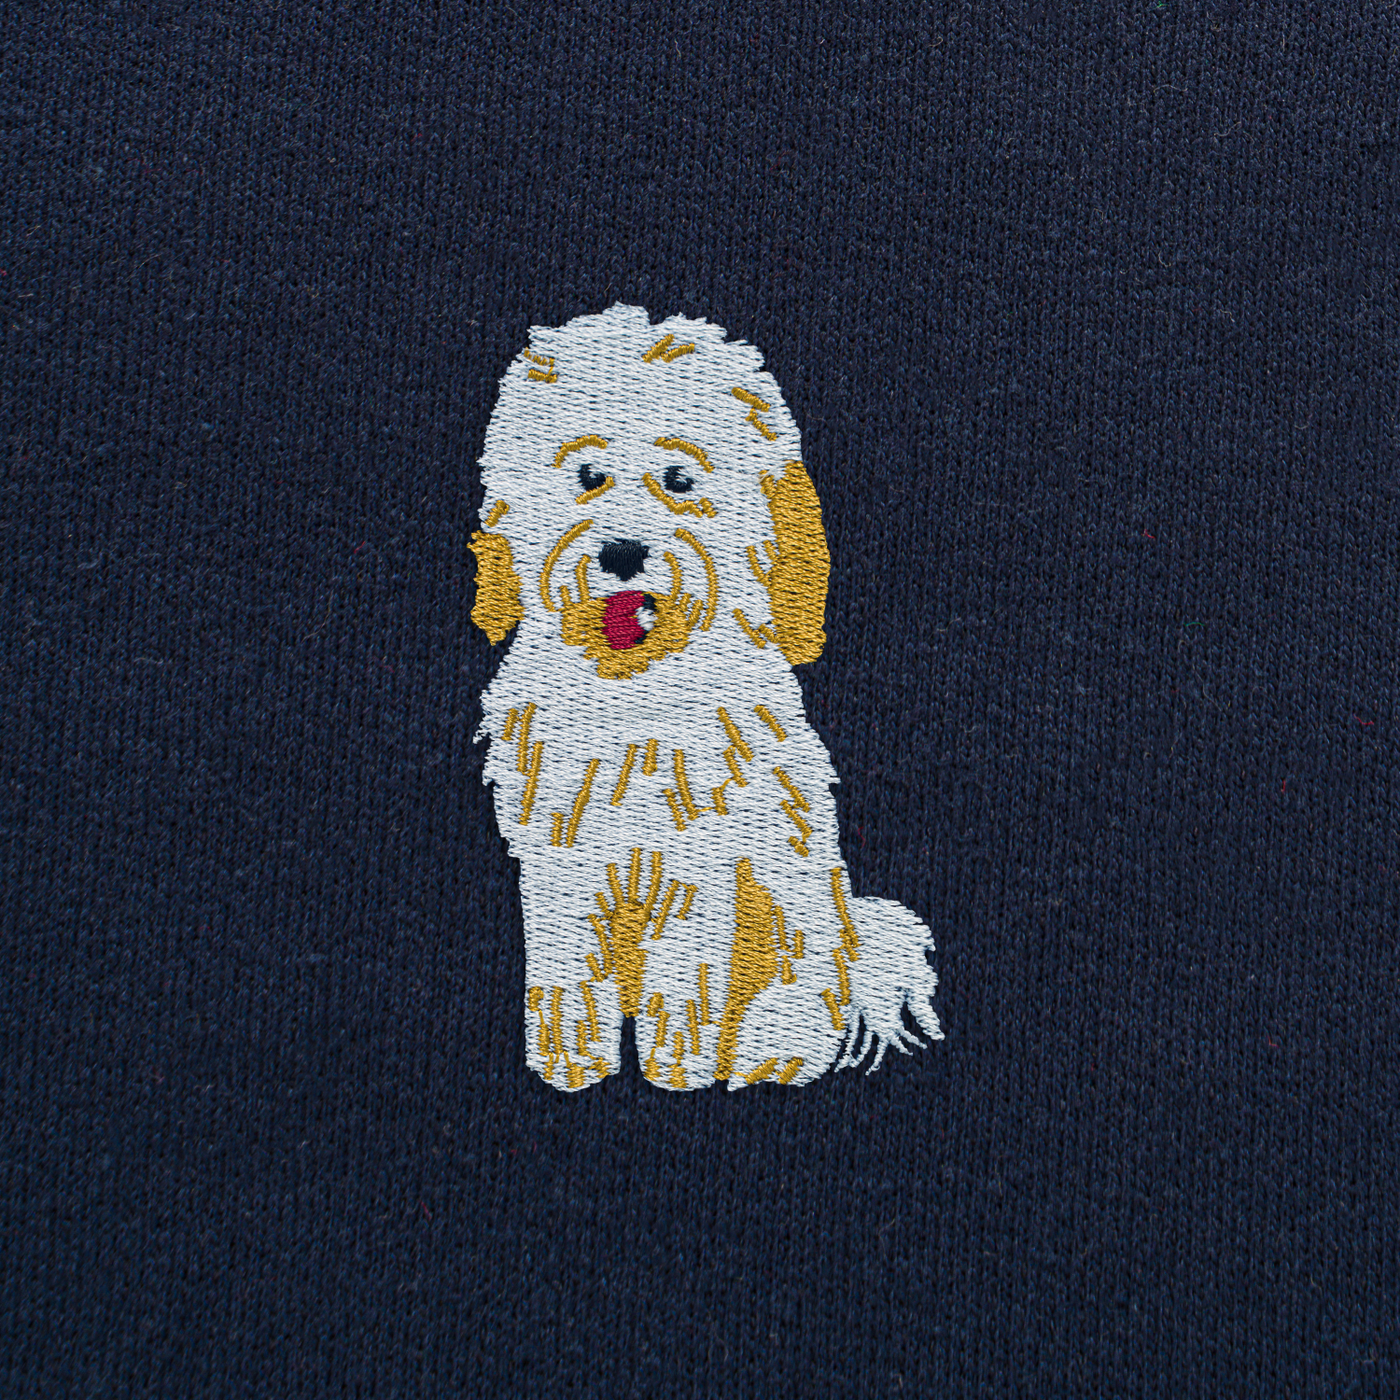 Bobby's Planet Men's Embroidered Poodle Hoodie from Bobbys Planet Toy Poodle Collection in Navy Color#color_navy